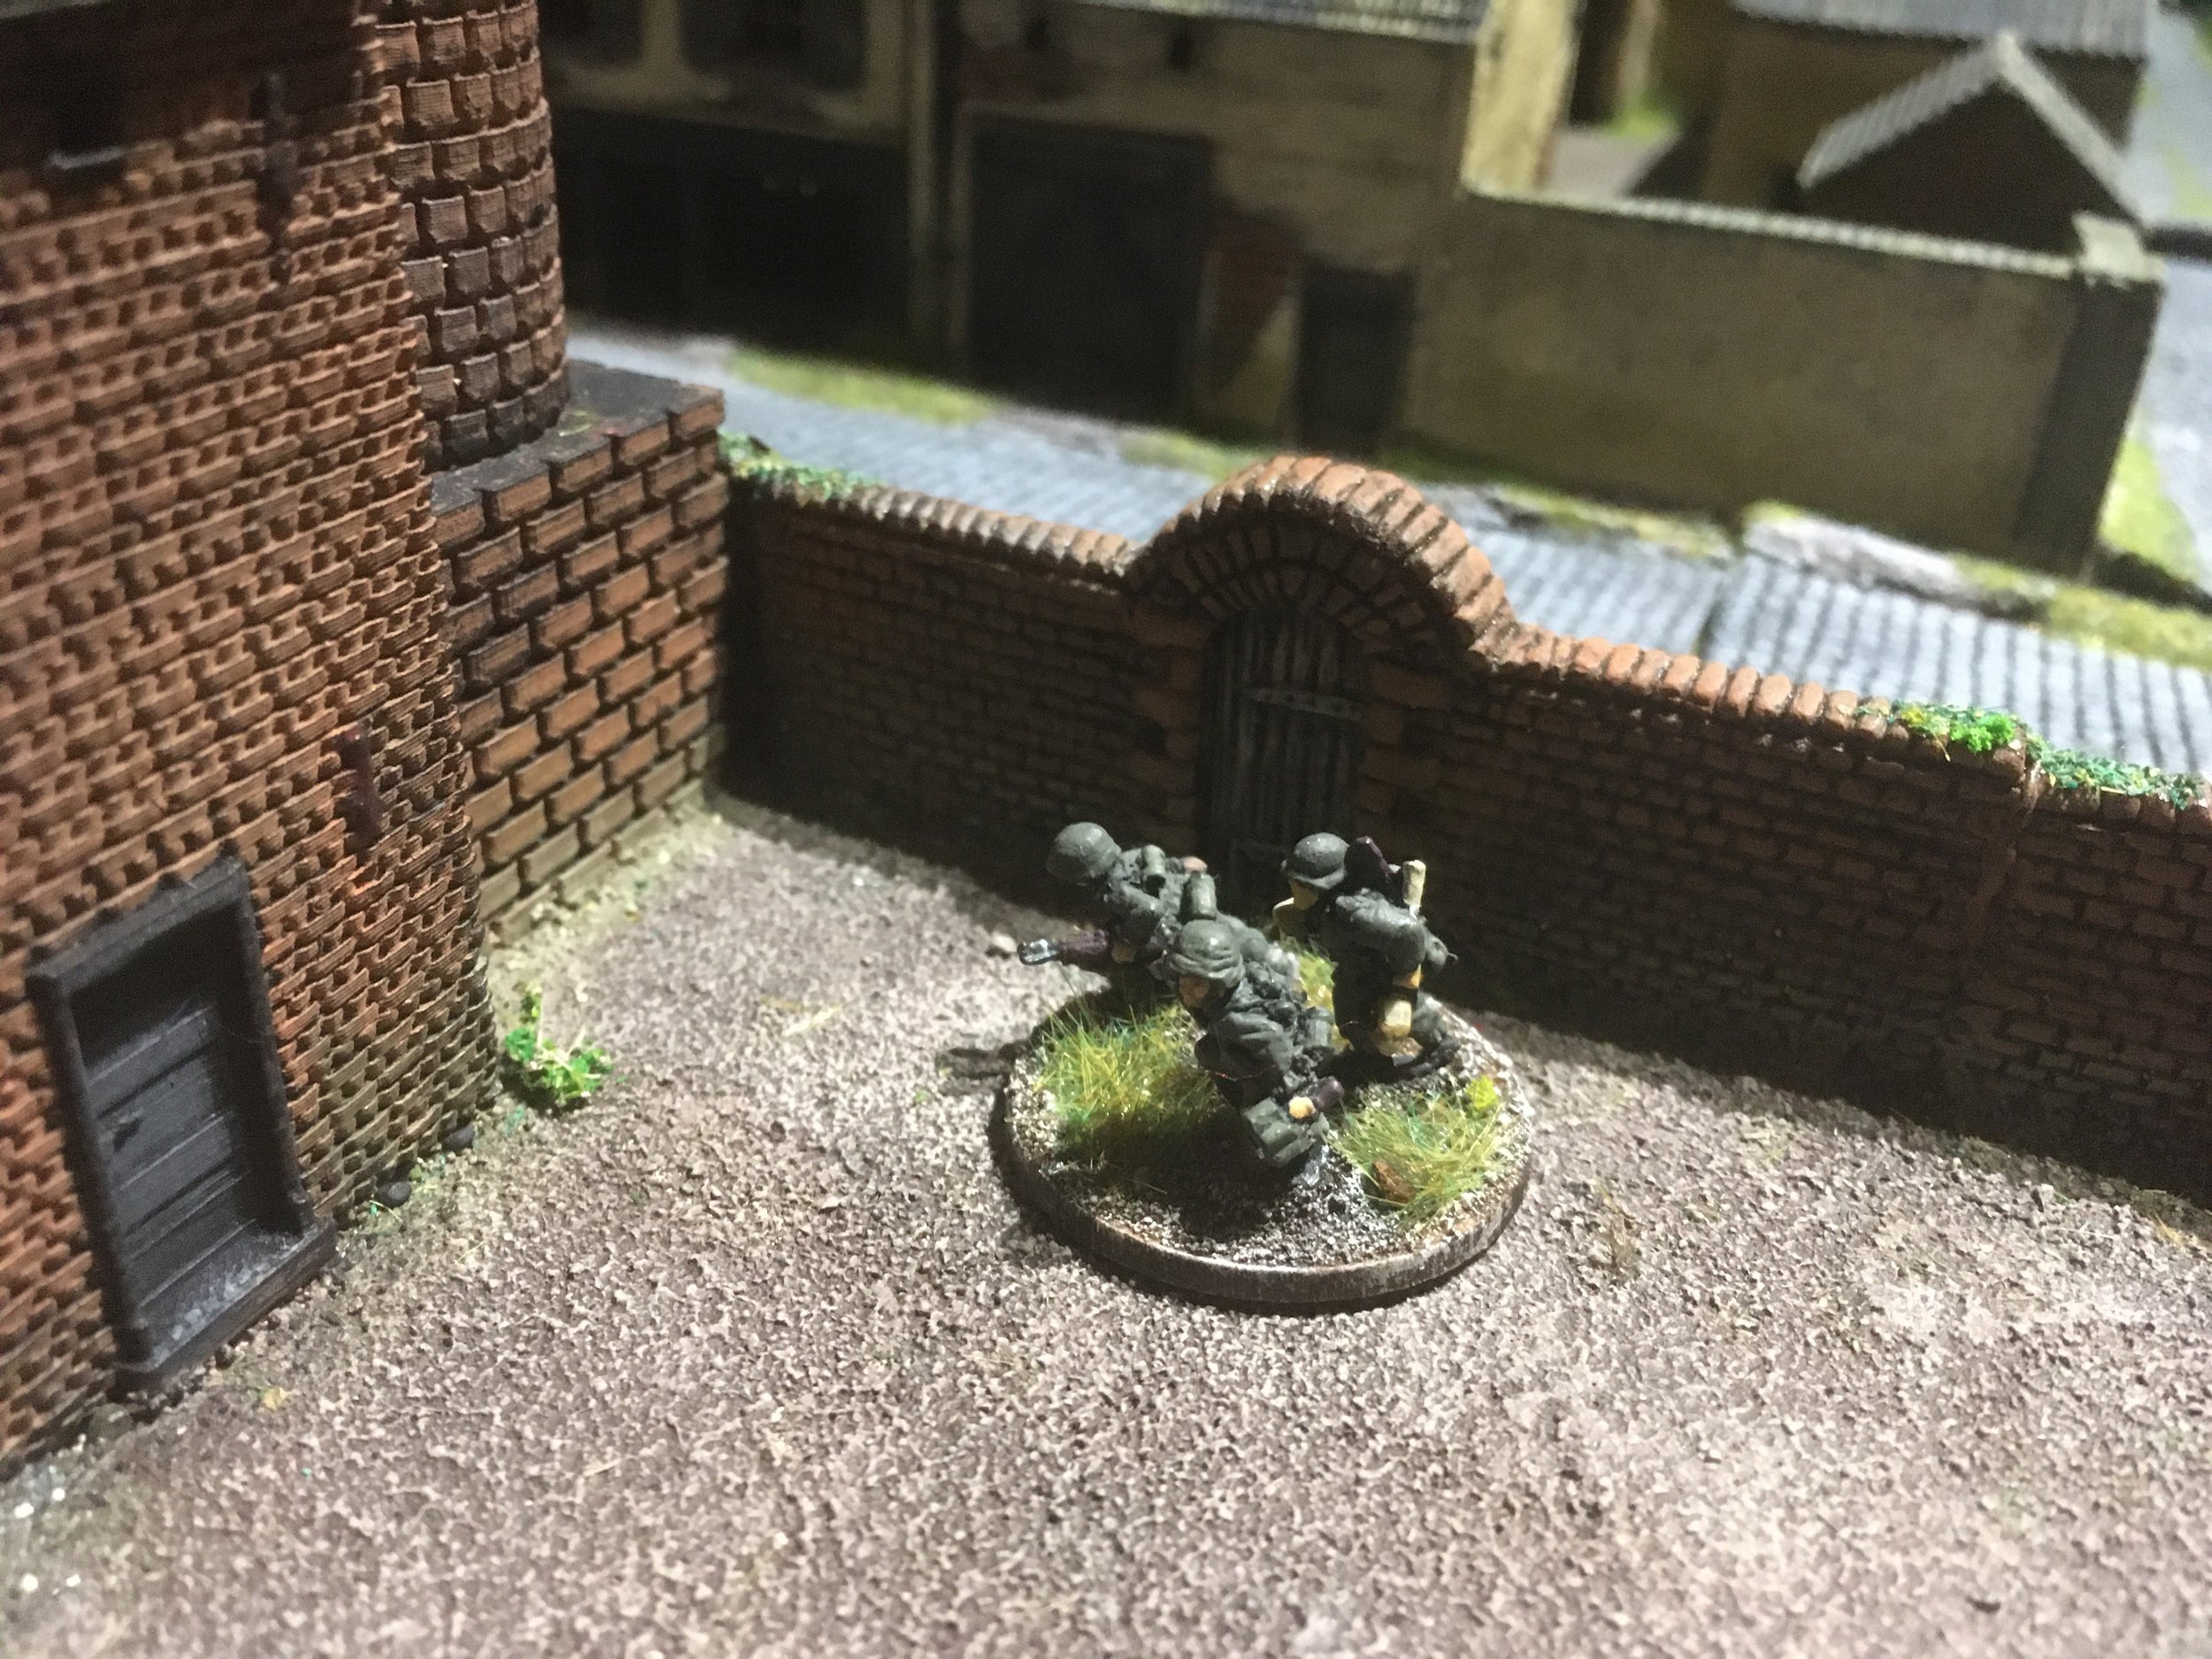 The Panzerknacker team rushed to the collapsing railway line flank...